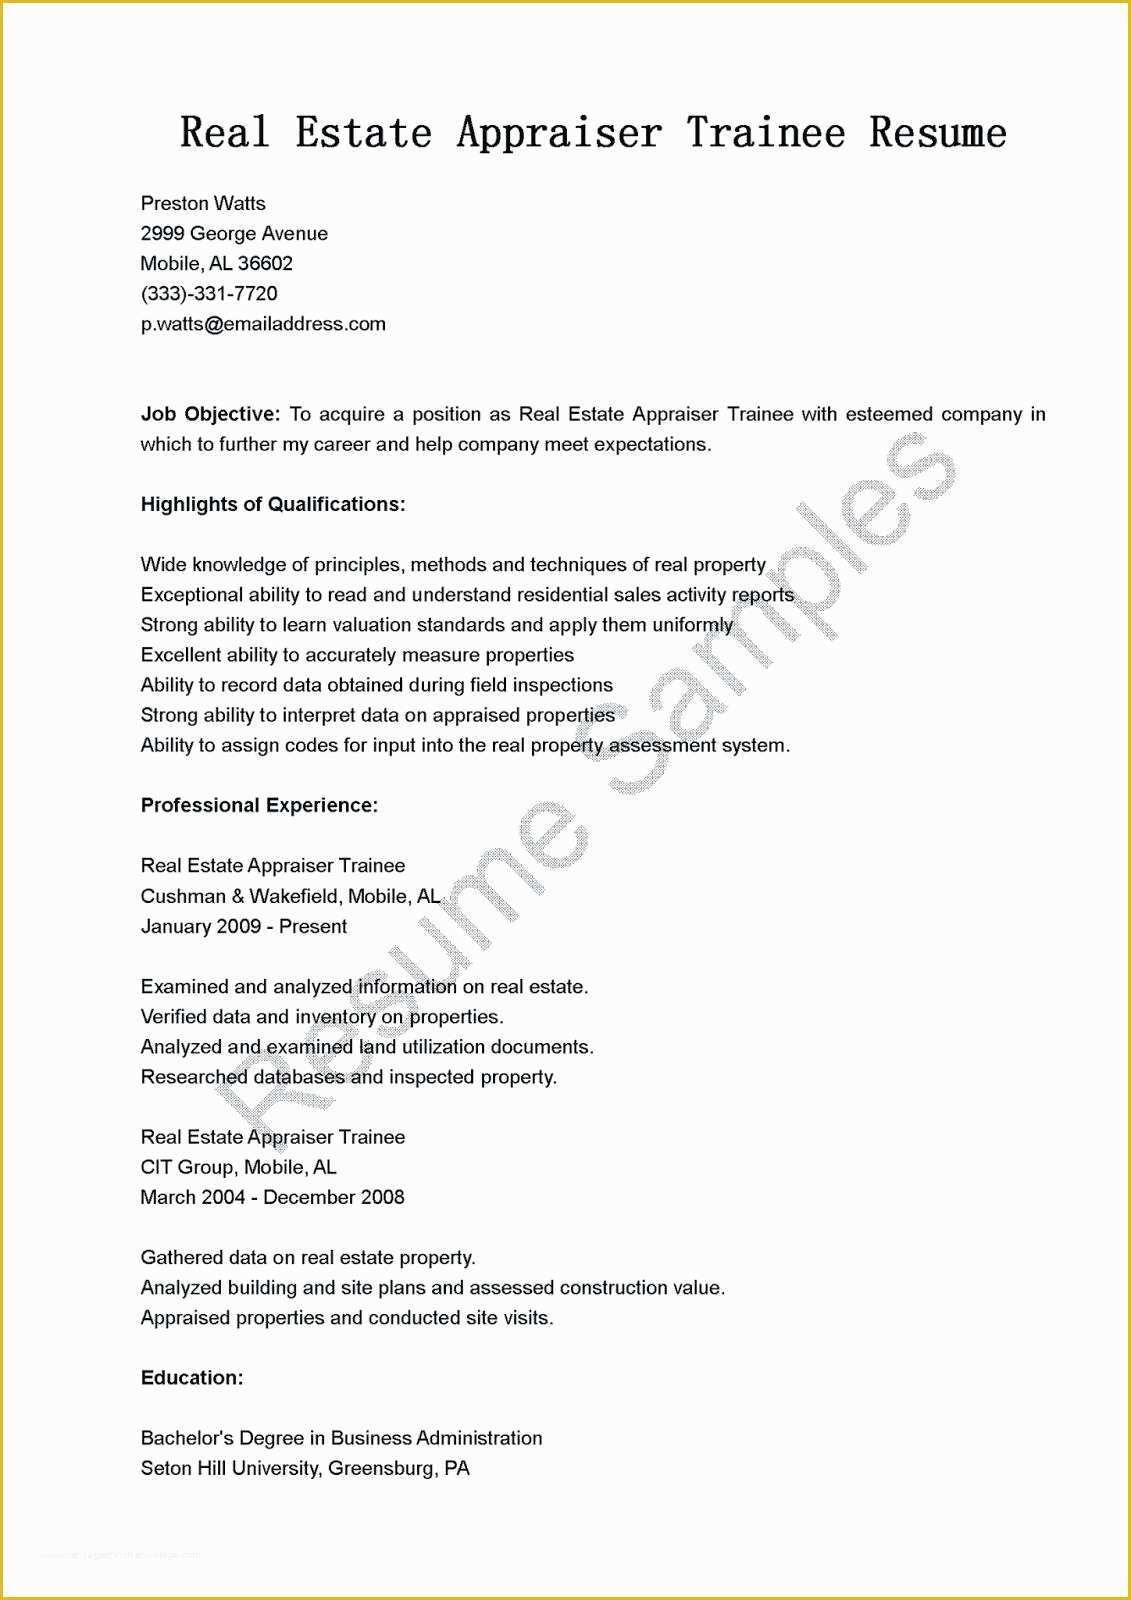 Actual Free Resume Templates Of Real Estate Appraiser Resume Examples format Pdf Example